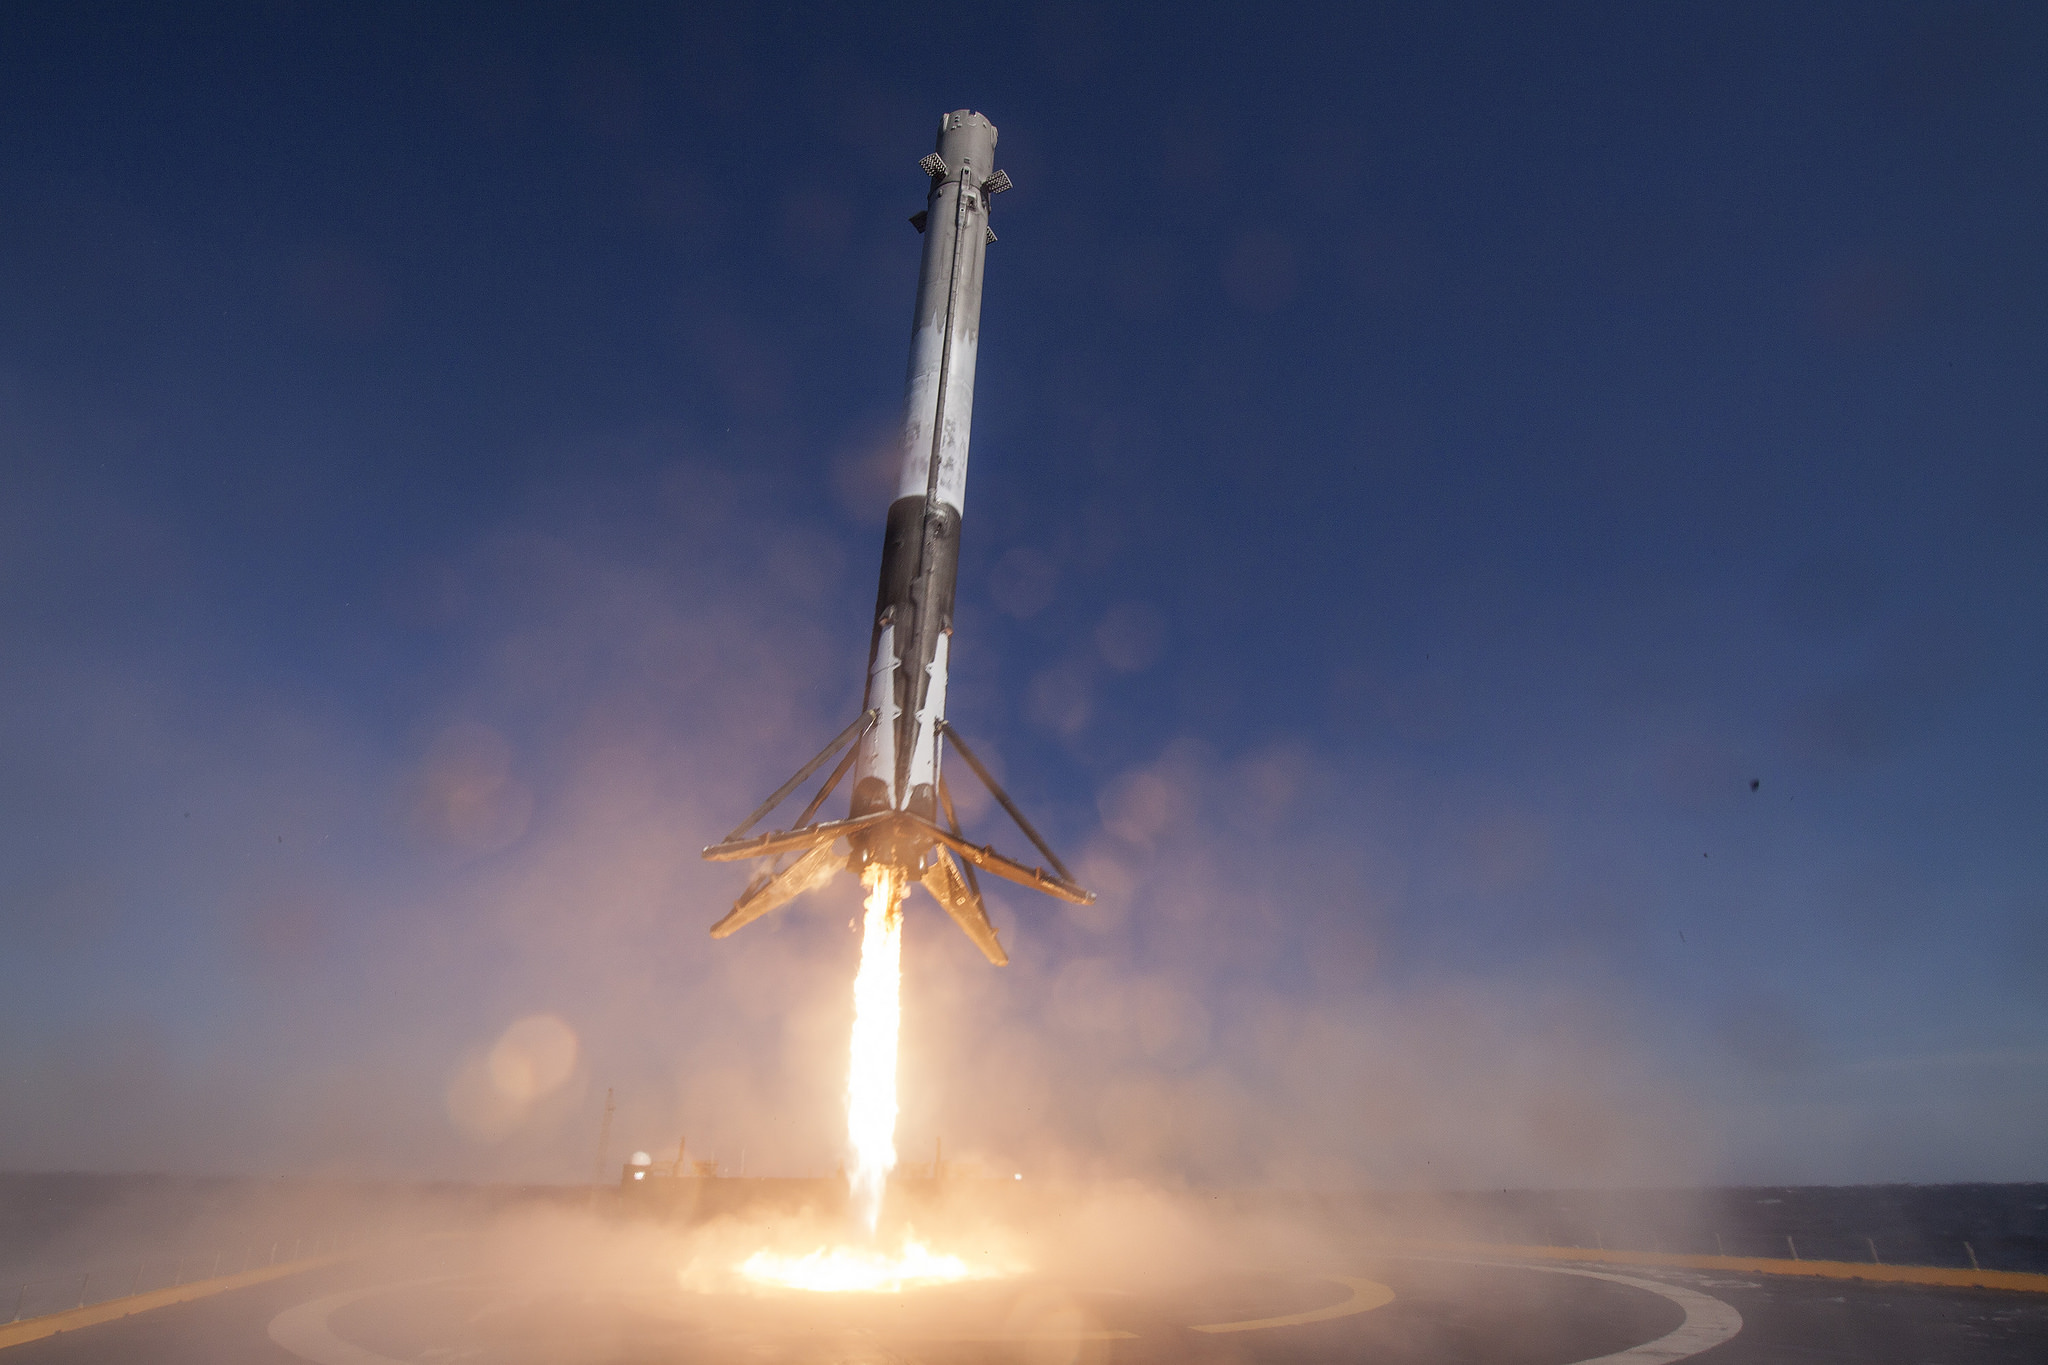 Remote camera photo from "Of Course I Still Love You" droneship of Falcon 9 first stage landing following launch of Dragon cargo ship to ISS on CRS-8 mission on 8 April 2016. Credit: SpaceX